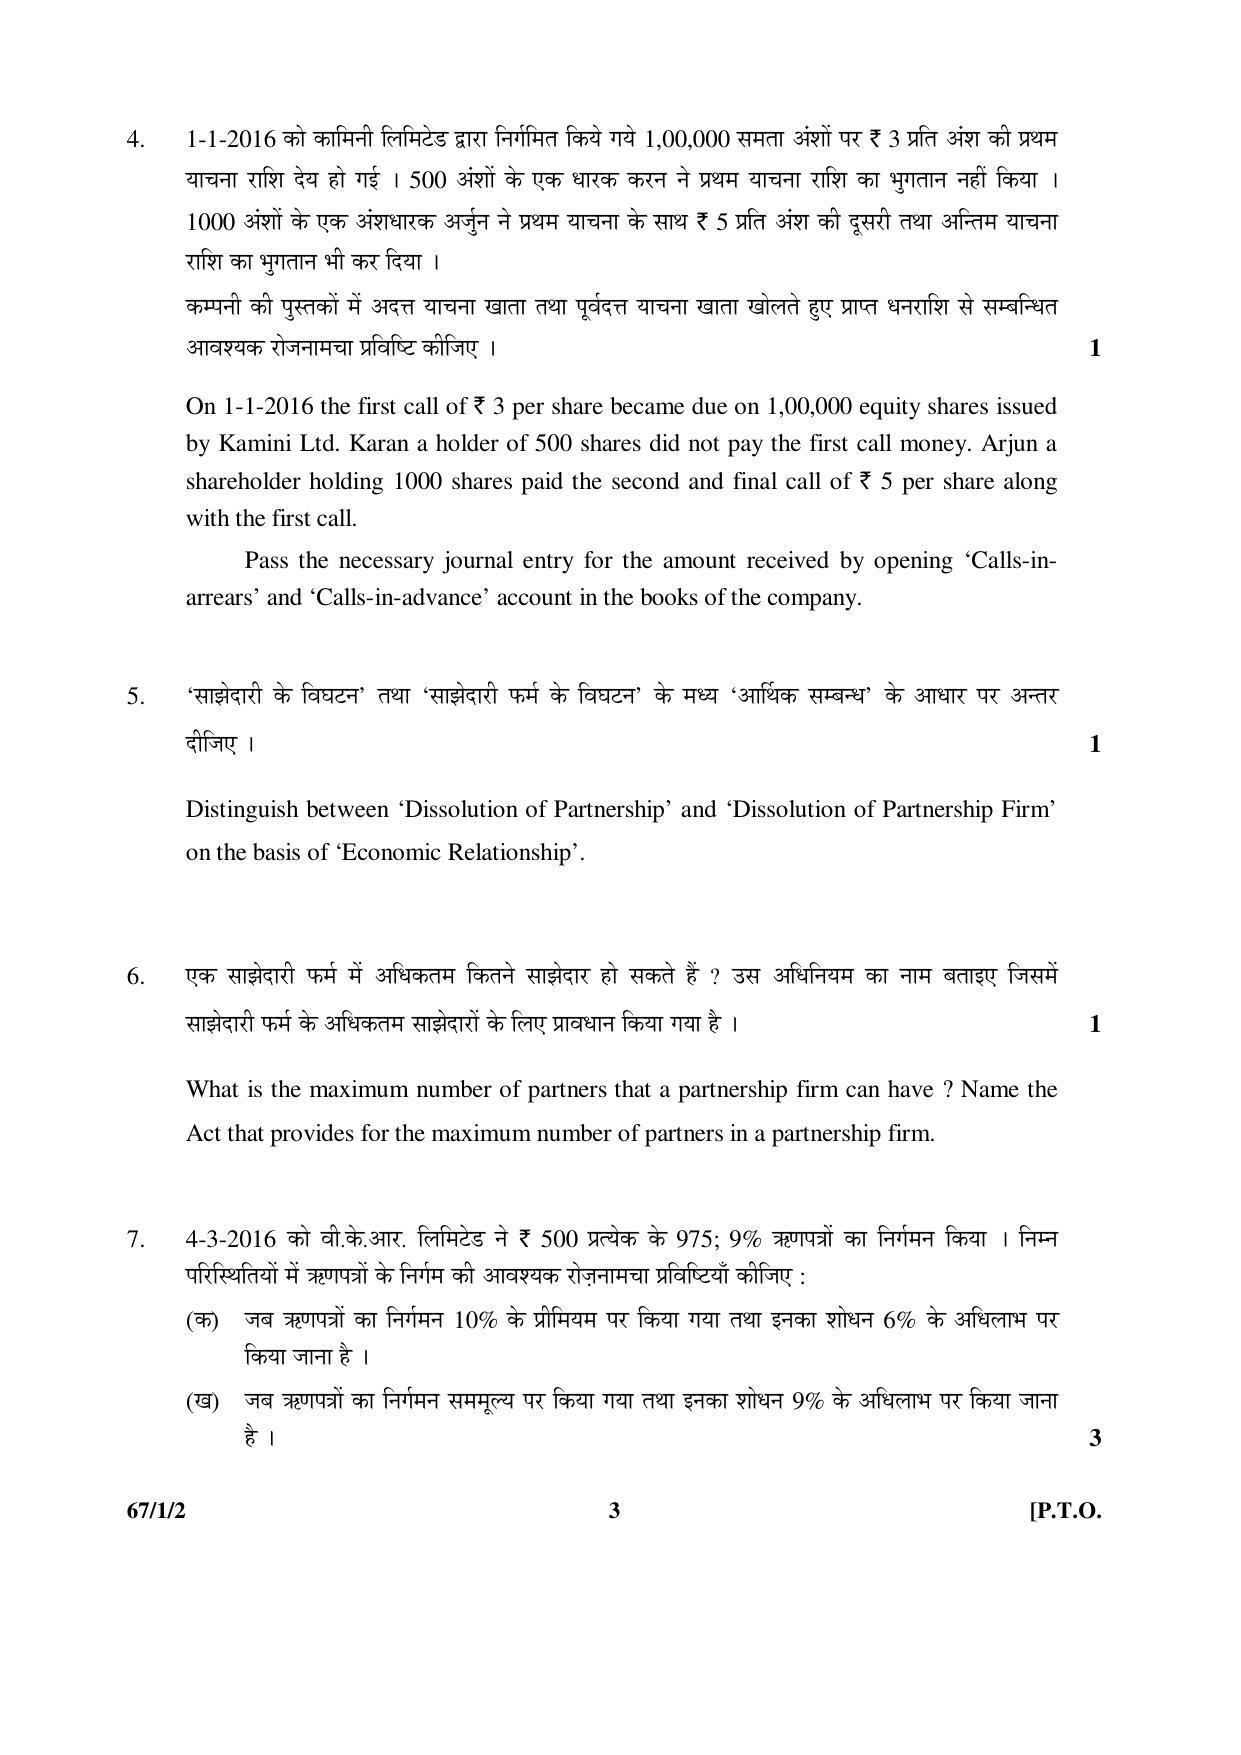 CBSE Class 12 67-1-2 ACCOUNTANCY 2016 Question Paper - Page 3